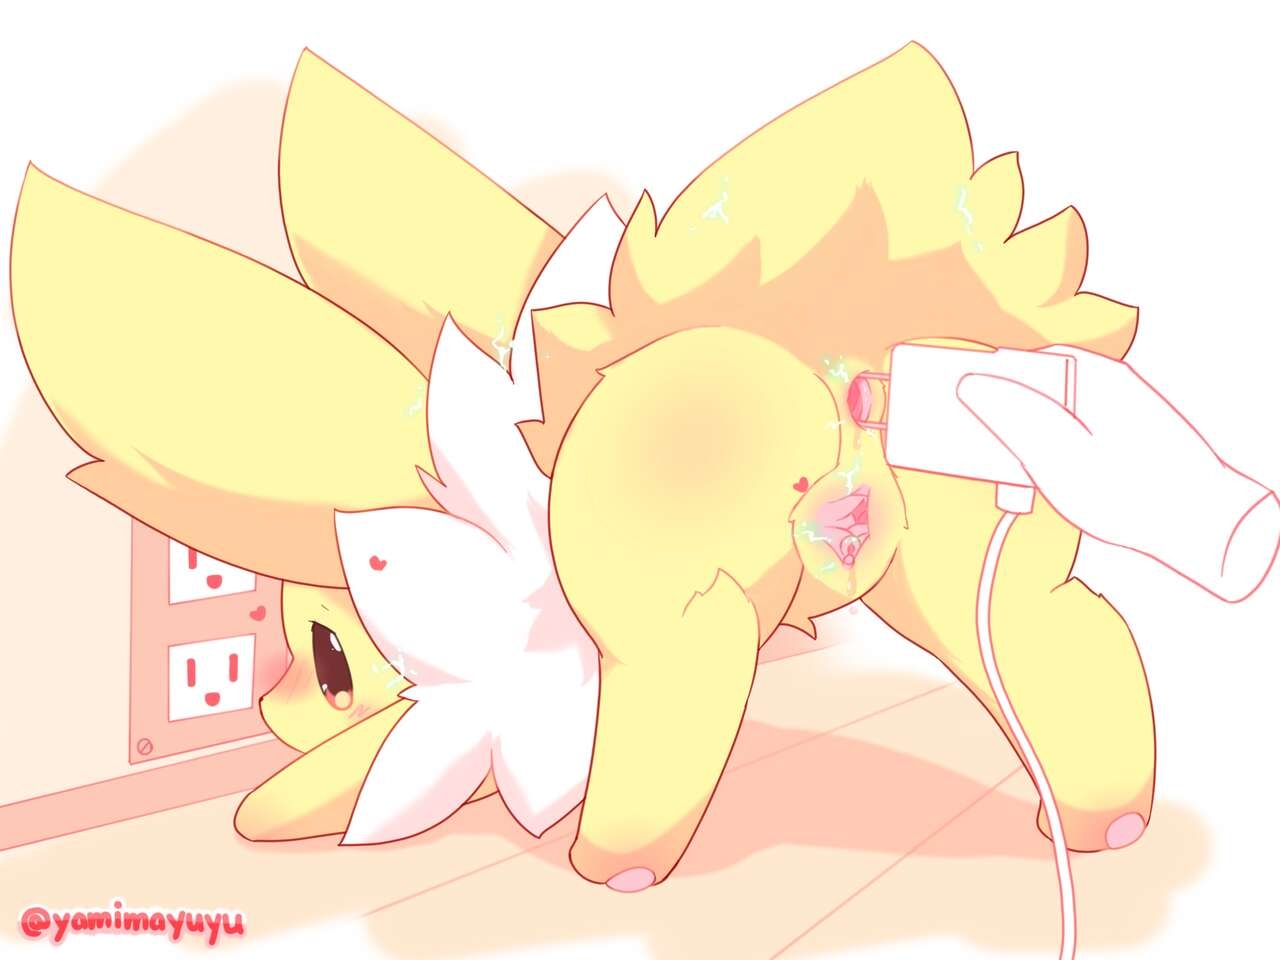 [Nekomayo] SUBSCRIBESTAR | Jolteon Phone Charger all visions 4